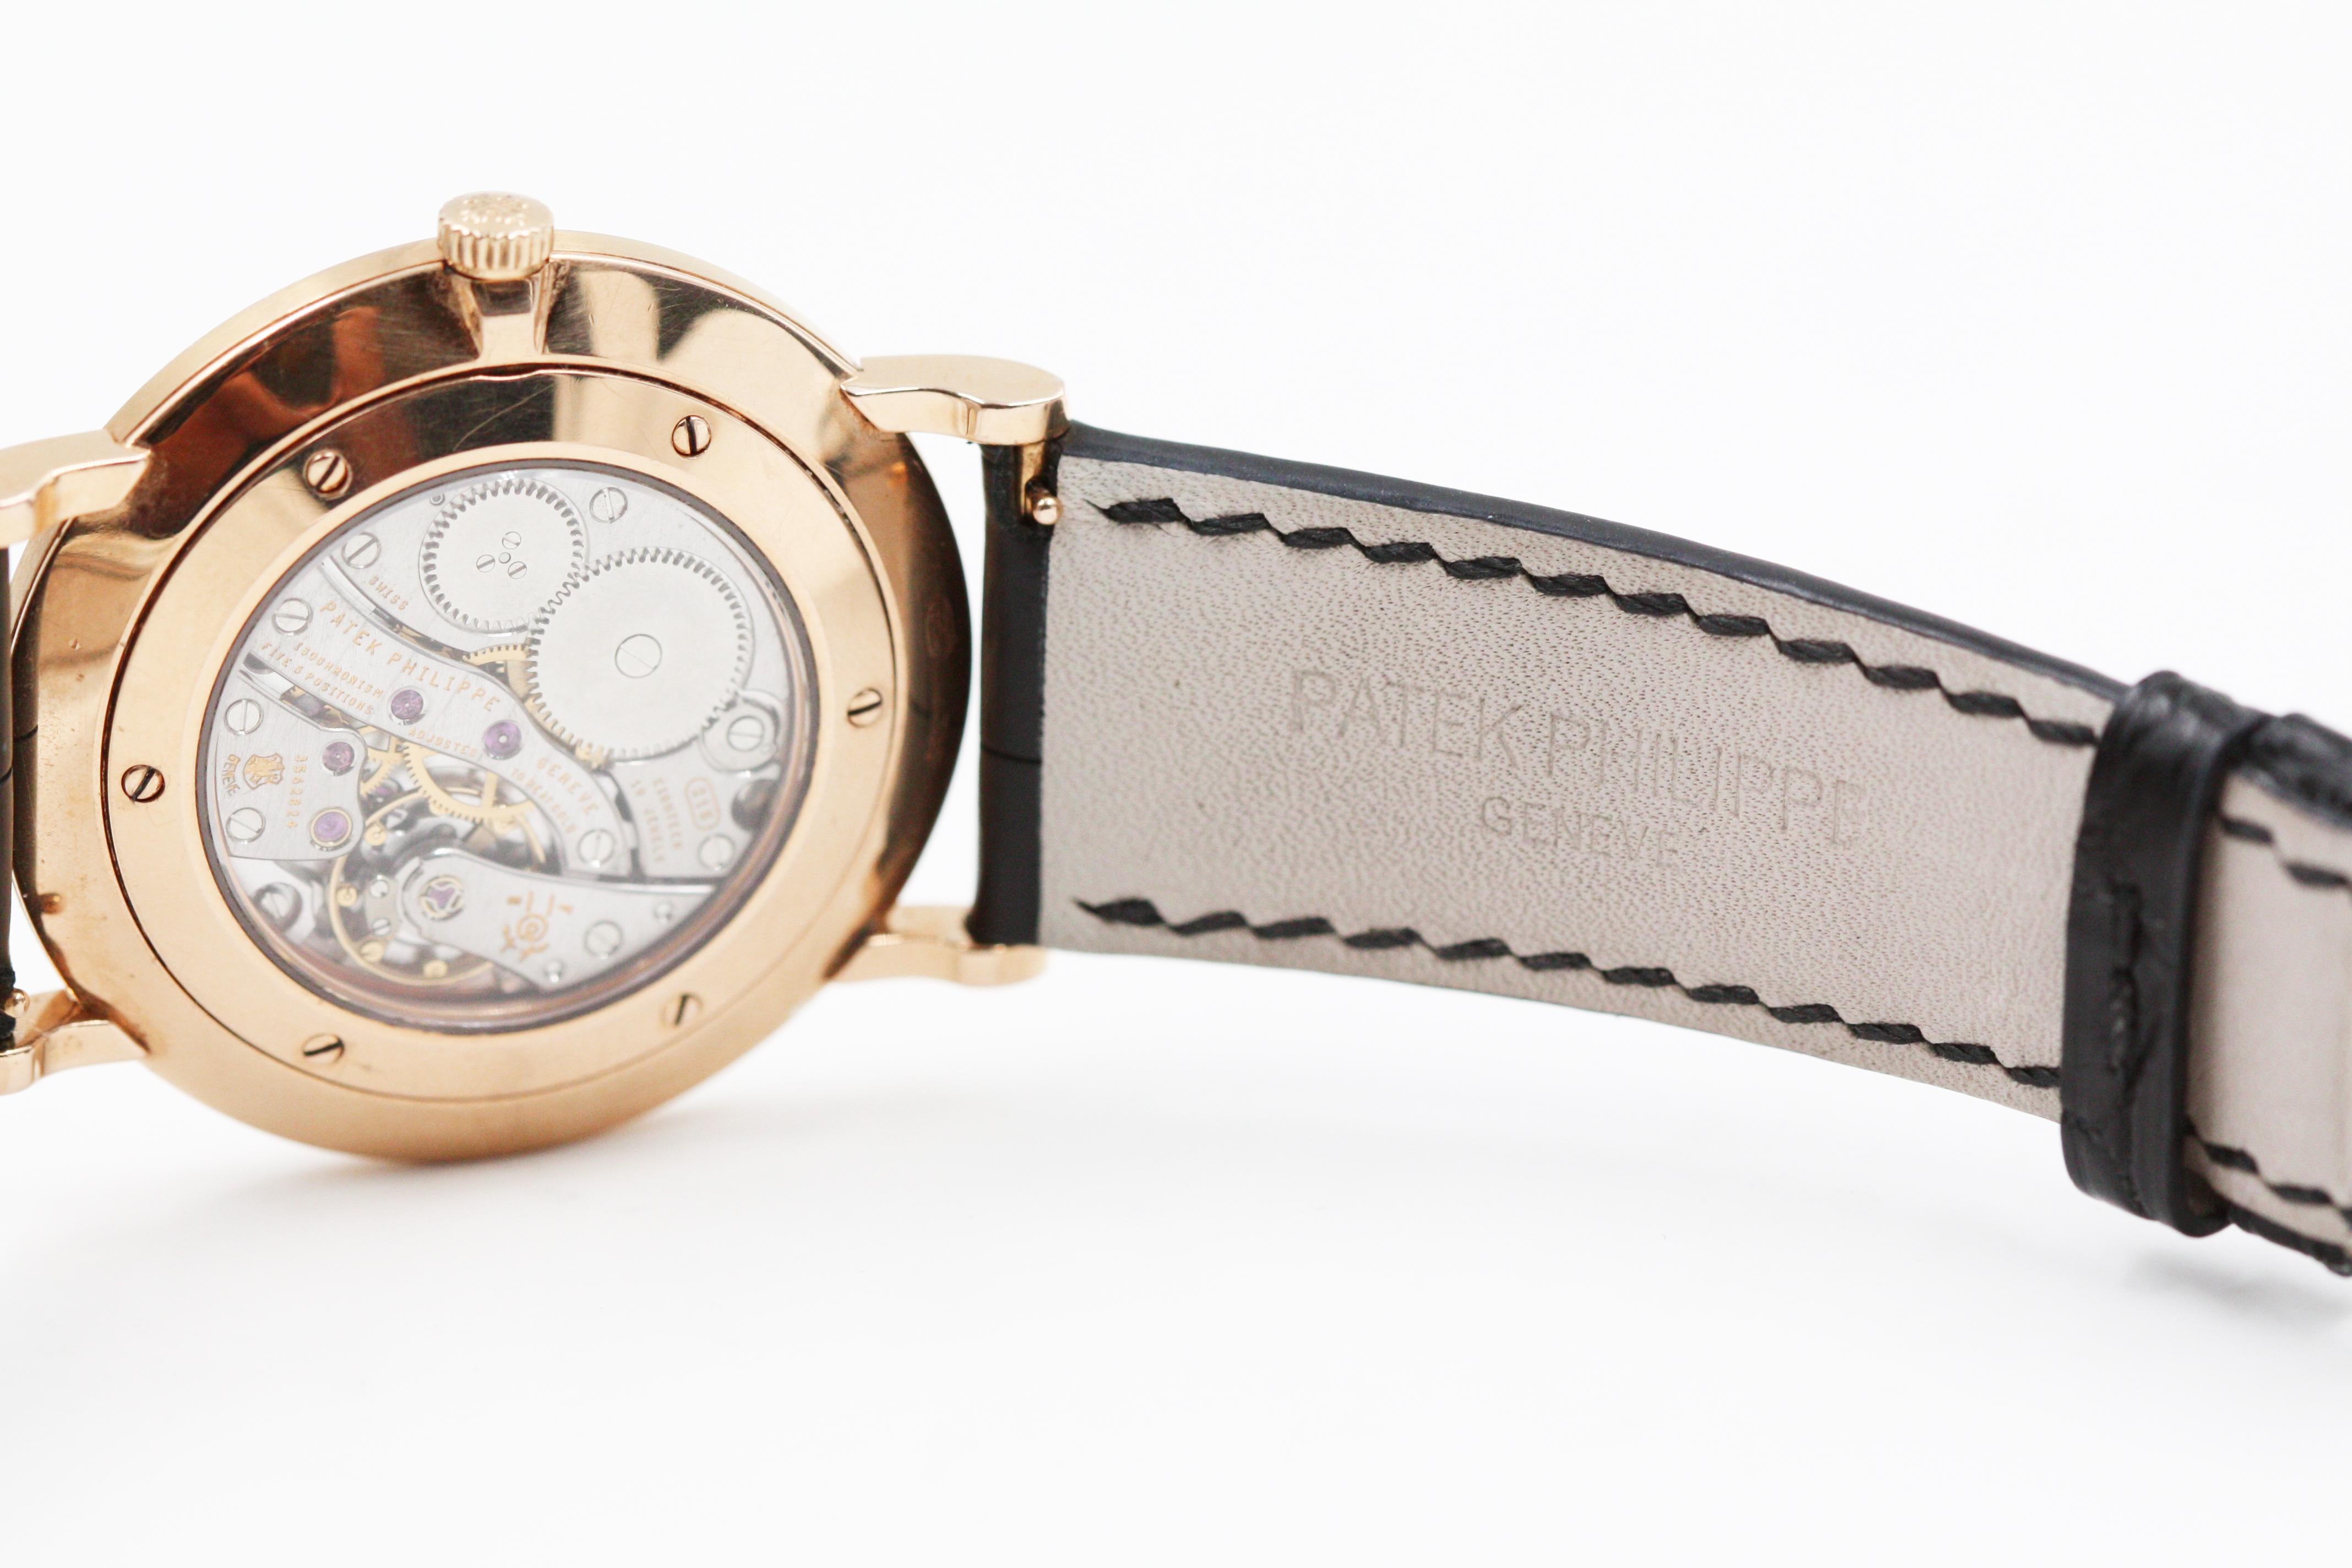 Patek Philippe 18 Karat Rose Gold Calatrava Men’s 5119r 001 Manual Wind Watch In Excellent Condition For Sale In New York, NY